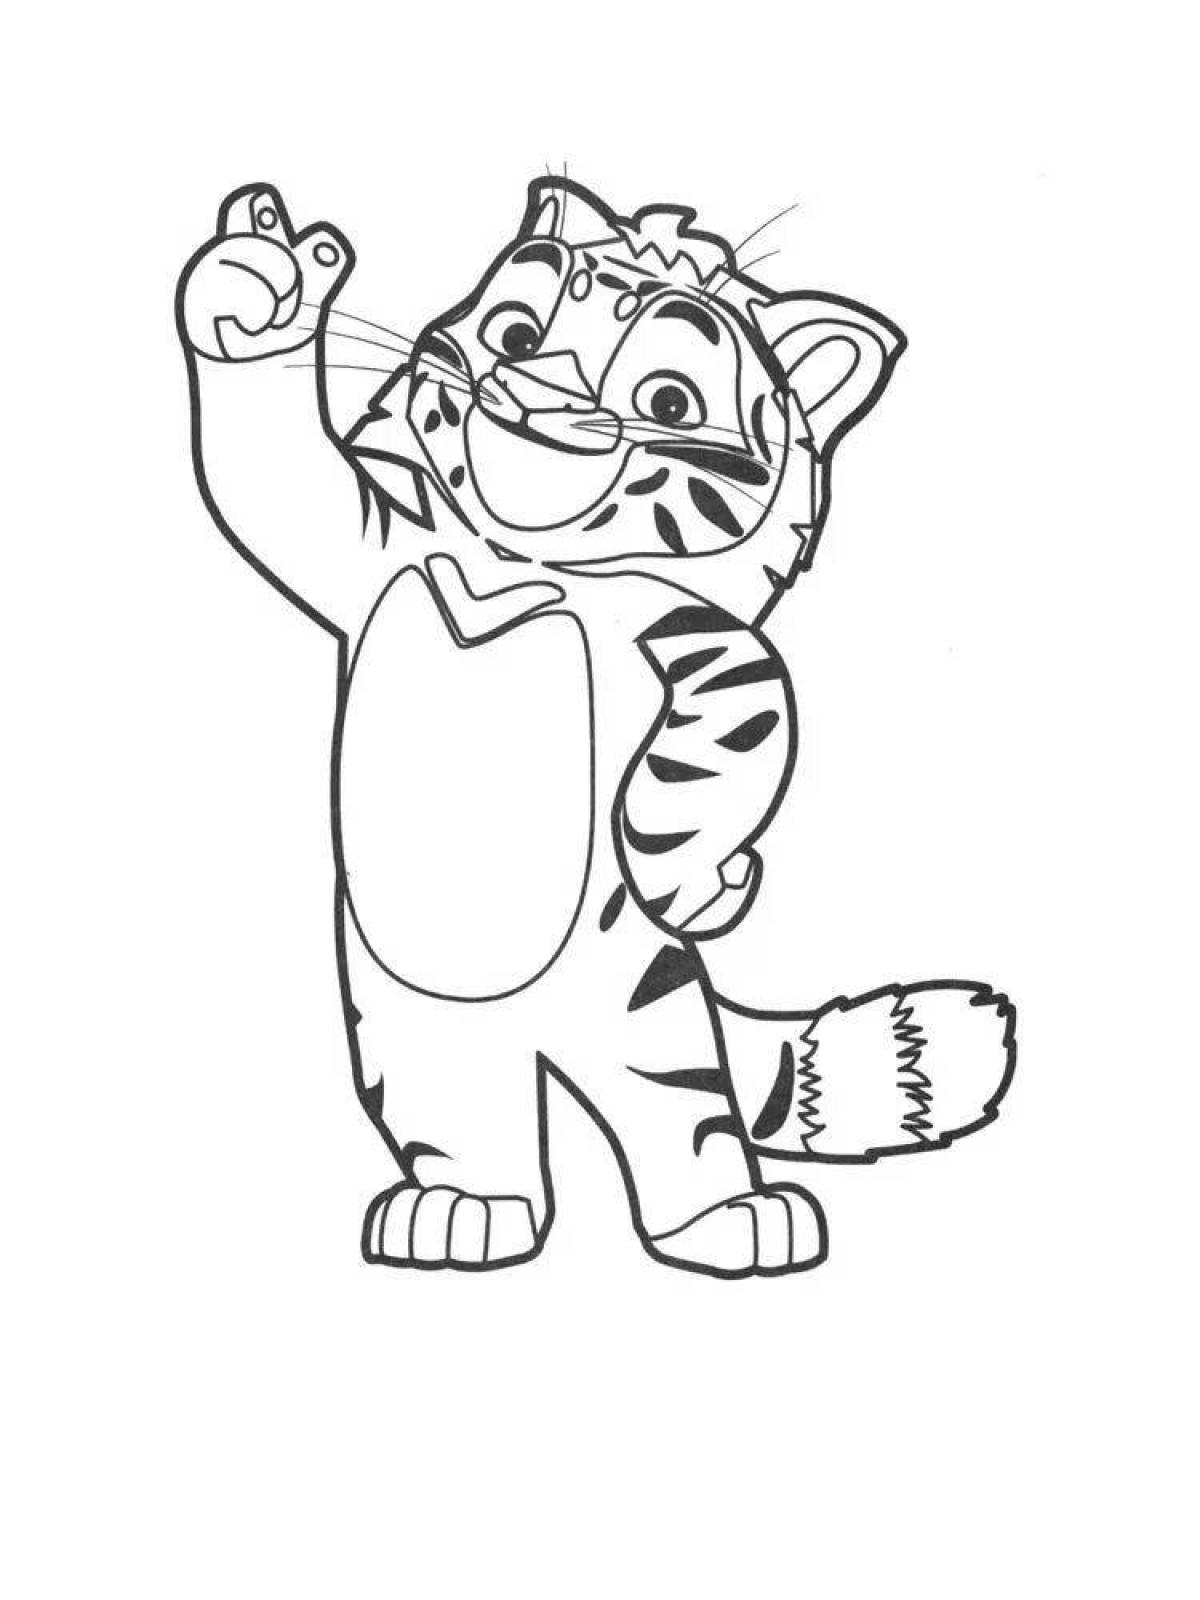 Joyful tiger and lion coloring pages for kids